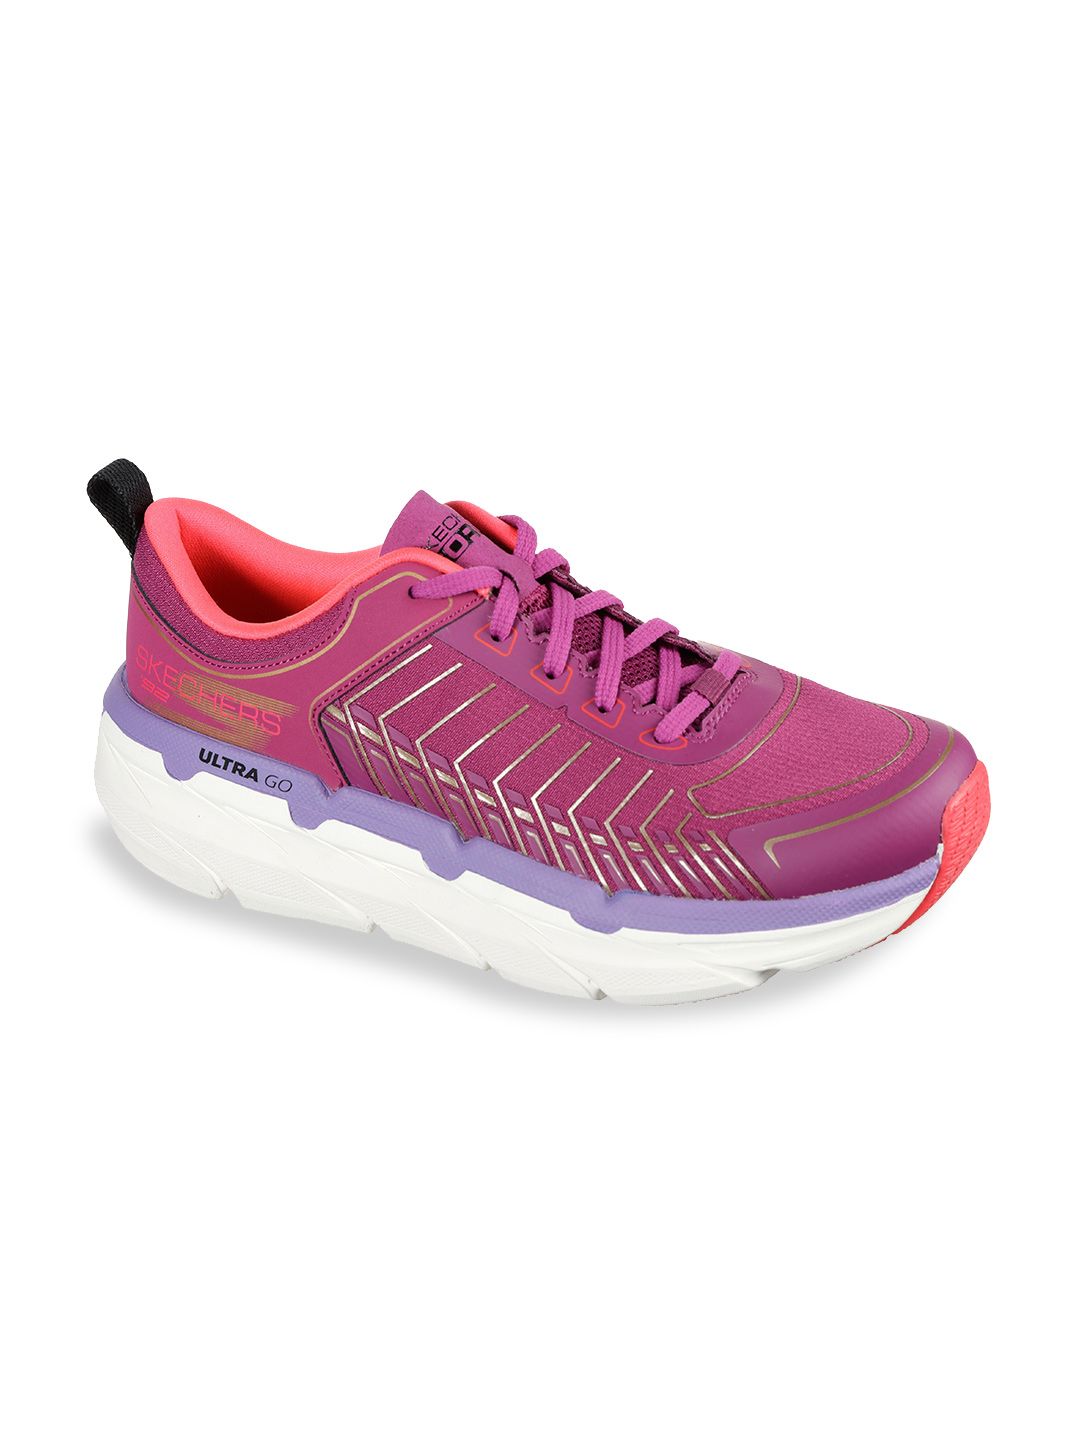 Skechers Women Red Mesh Running Non-Marking Shoes Price in India